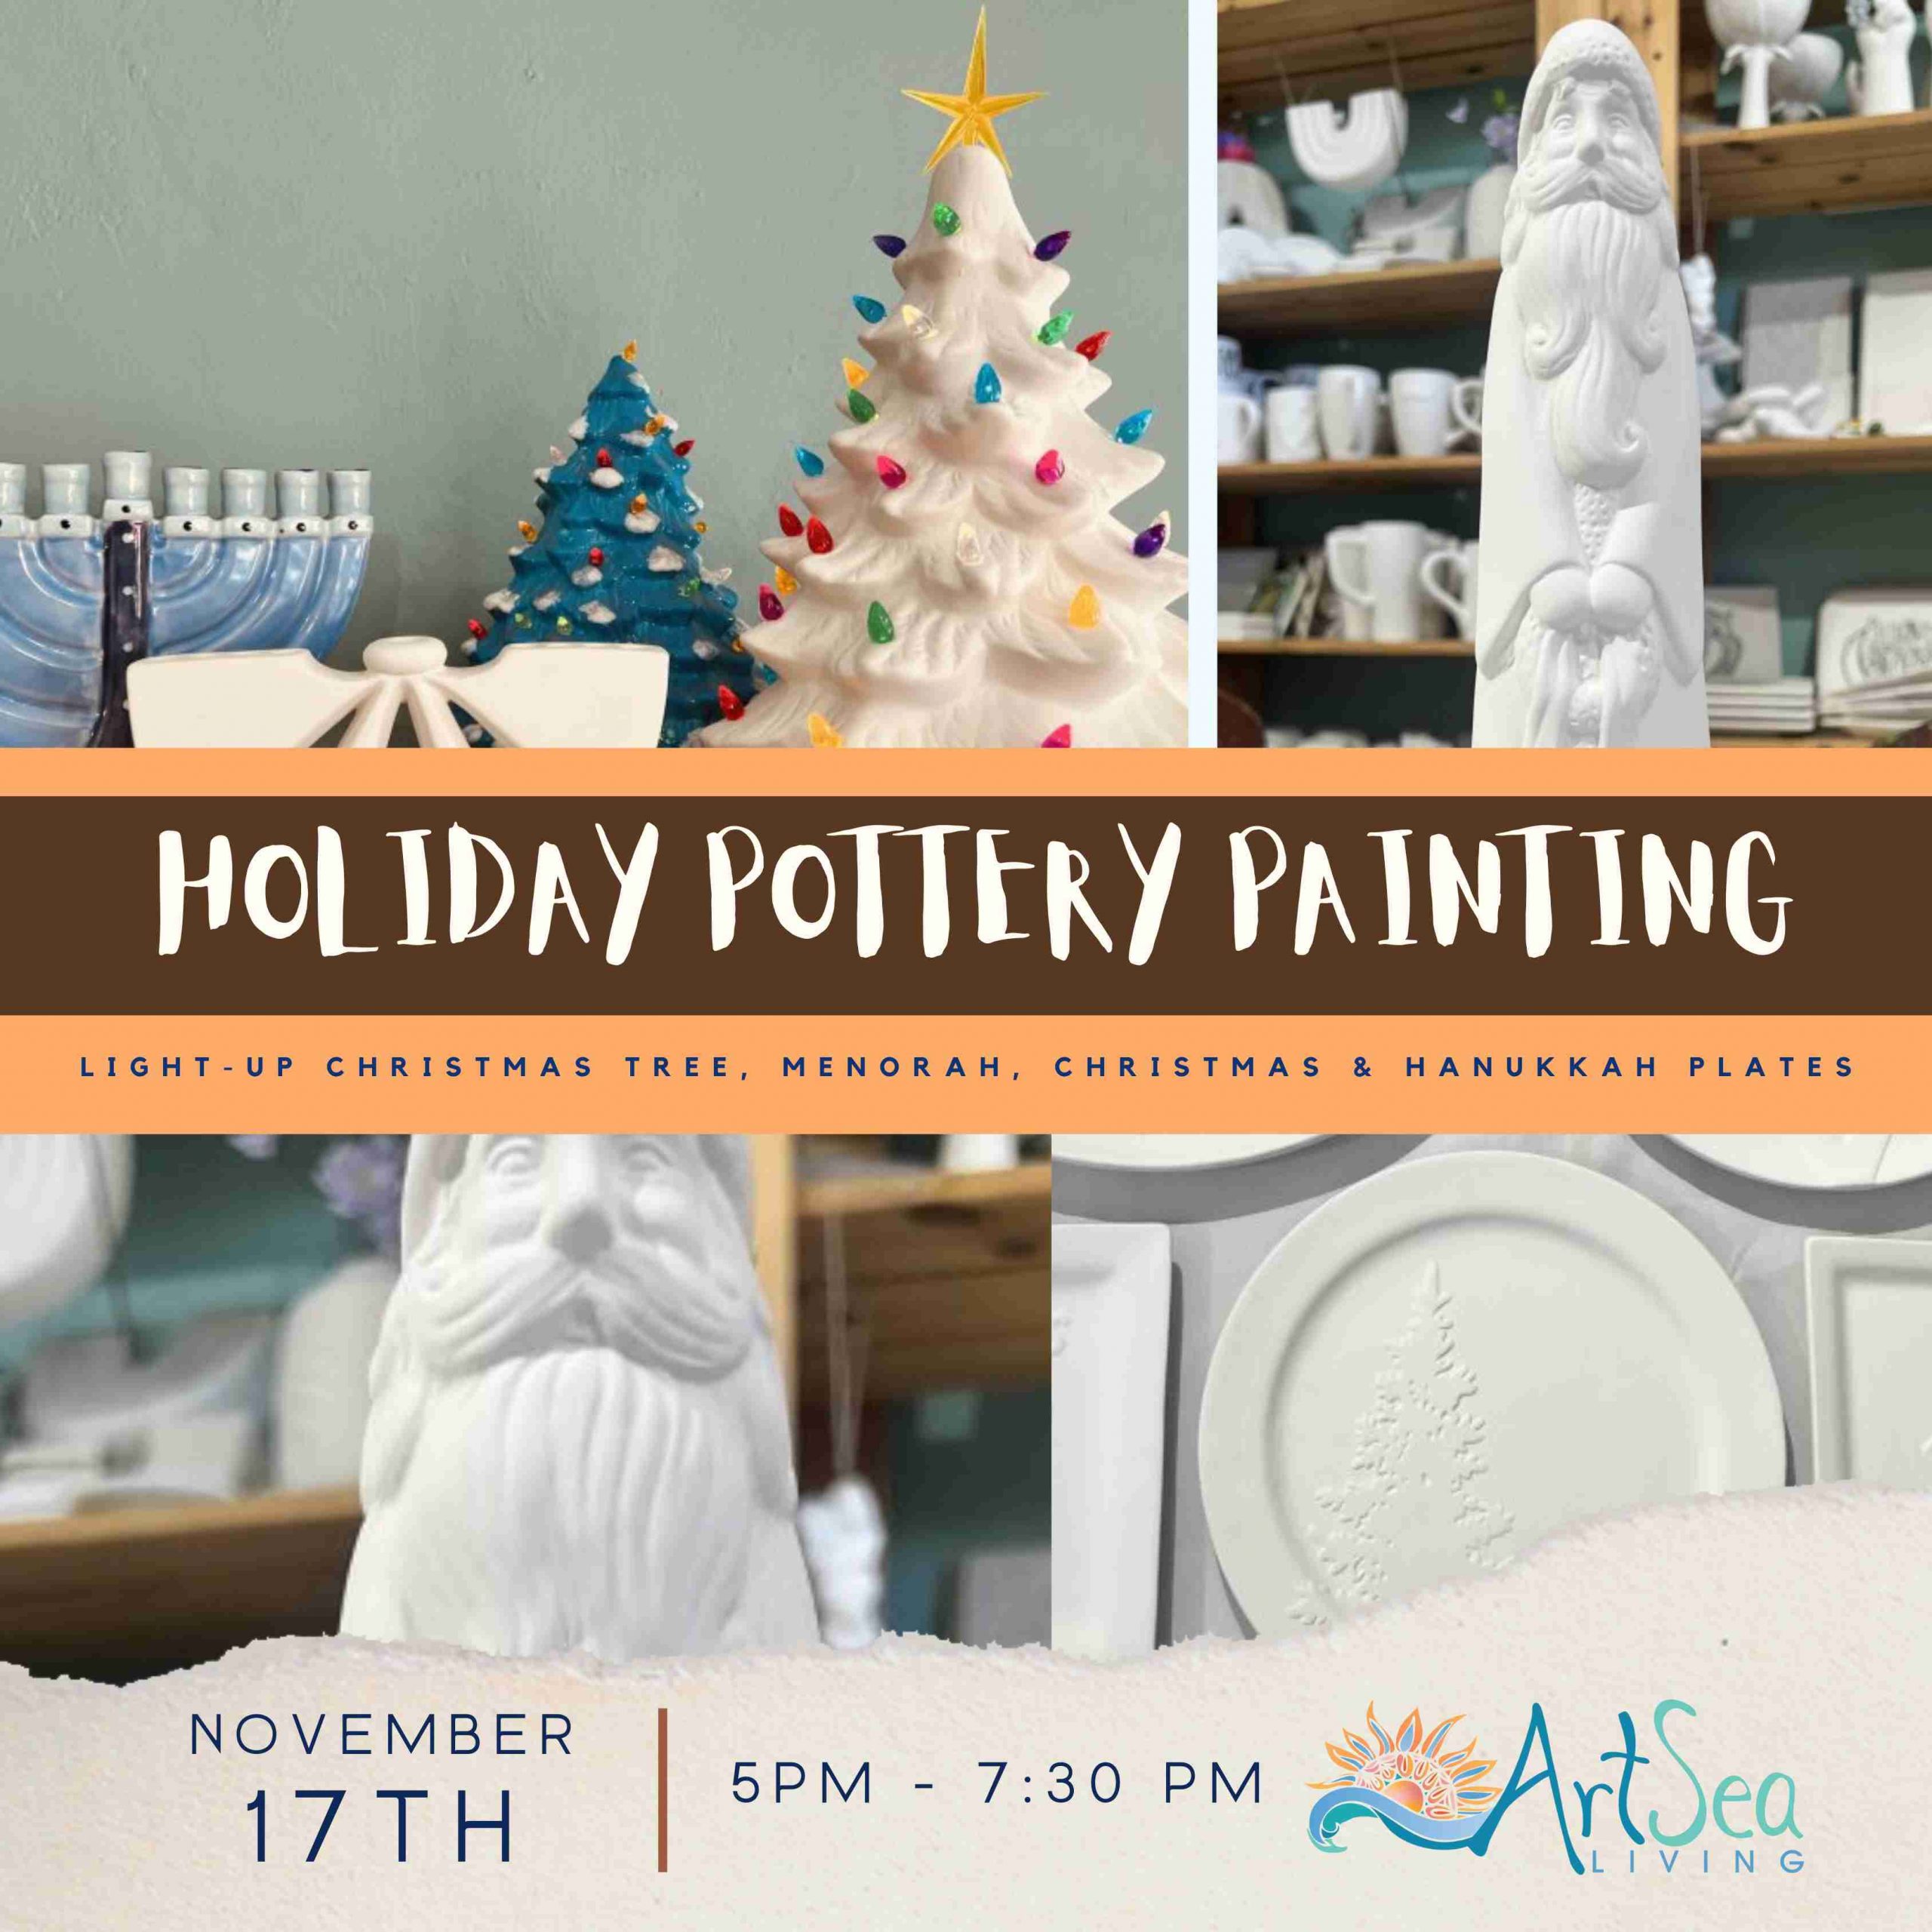 Holiday Pottery Painting